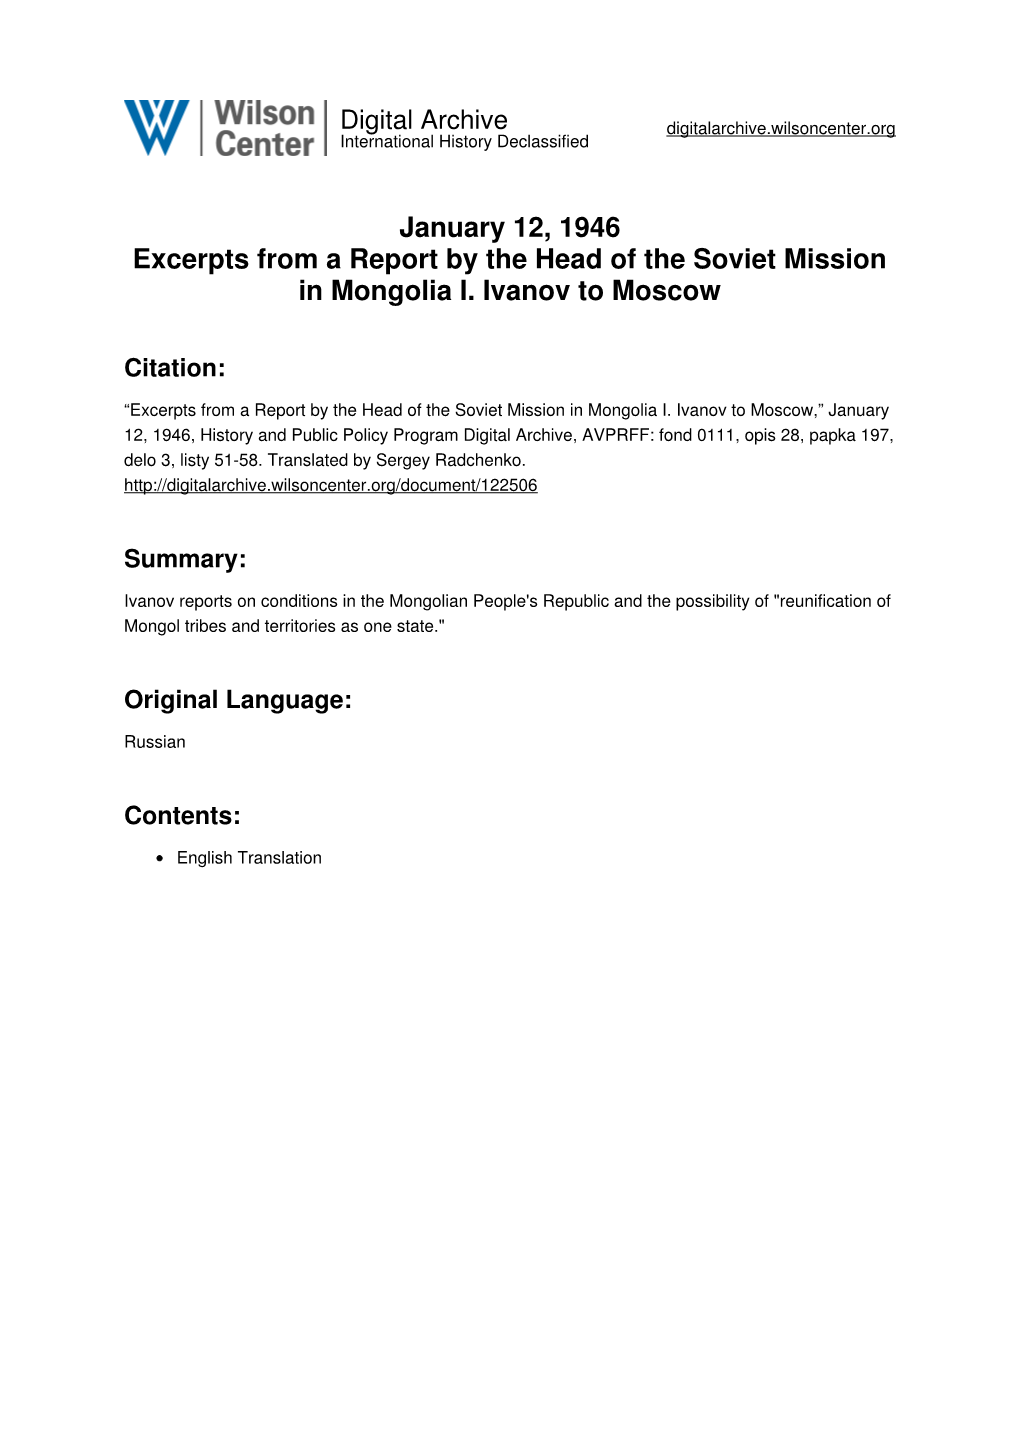 January 12, 1946 Excerpts from a Report by the Head of the Soviet Mission in Mongolia I